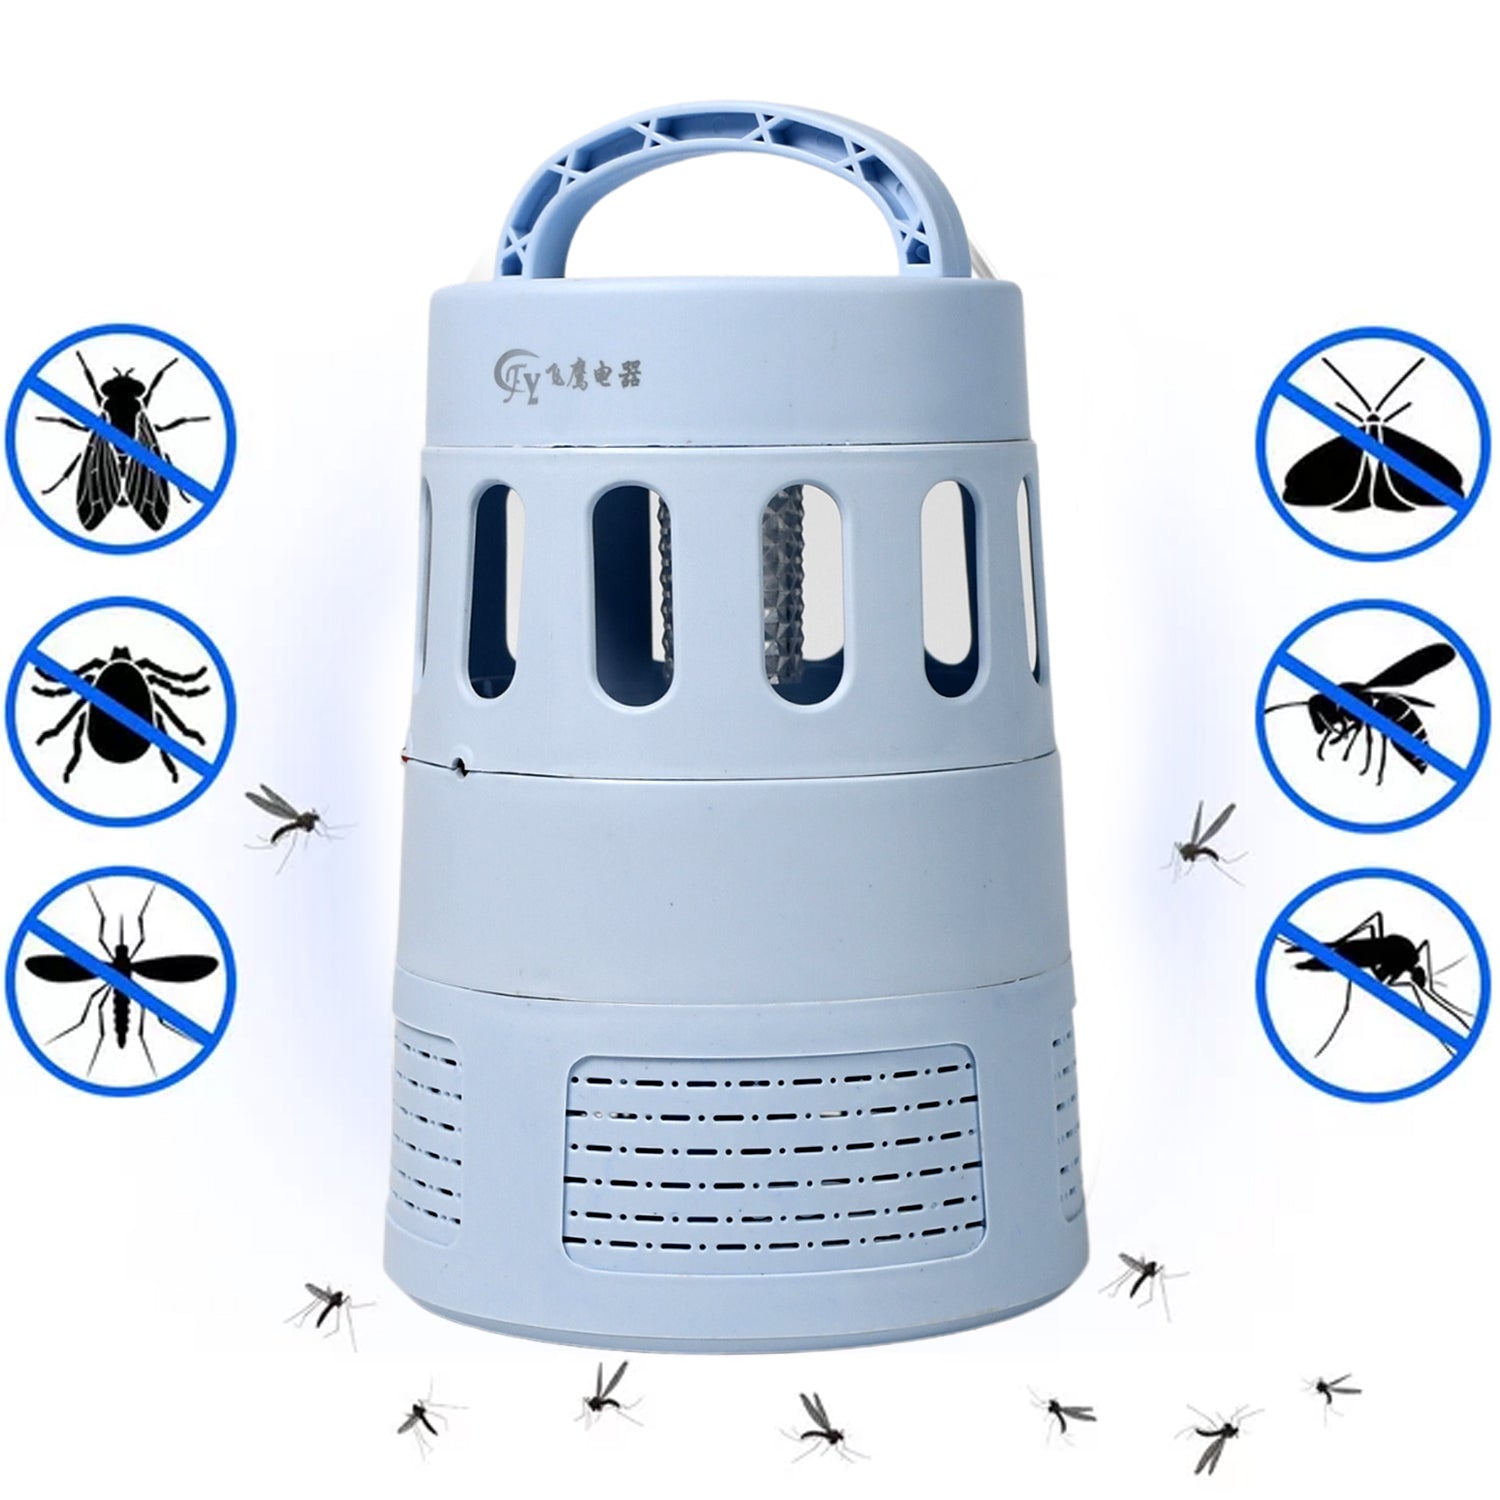 1476 Home Indoor Bedroom Mosquito Repellent Lamp Usb Plug-In No Radiation Baby Electric Trap USB Charging DeoDap